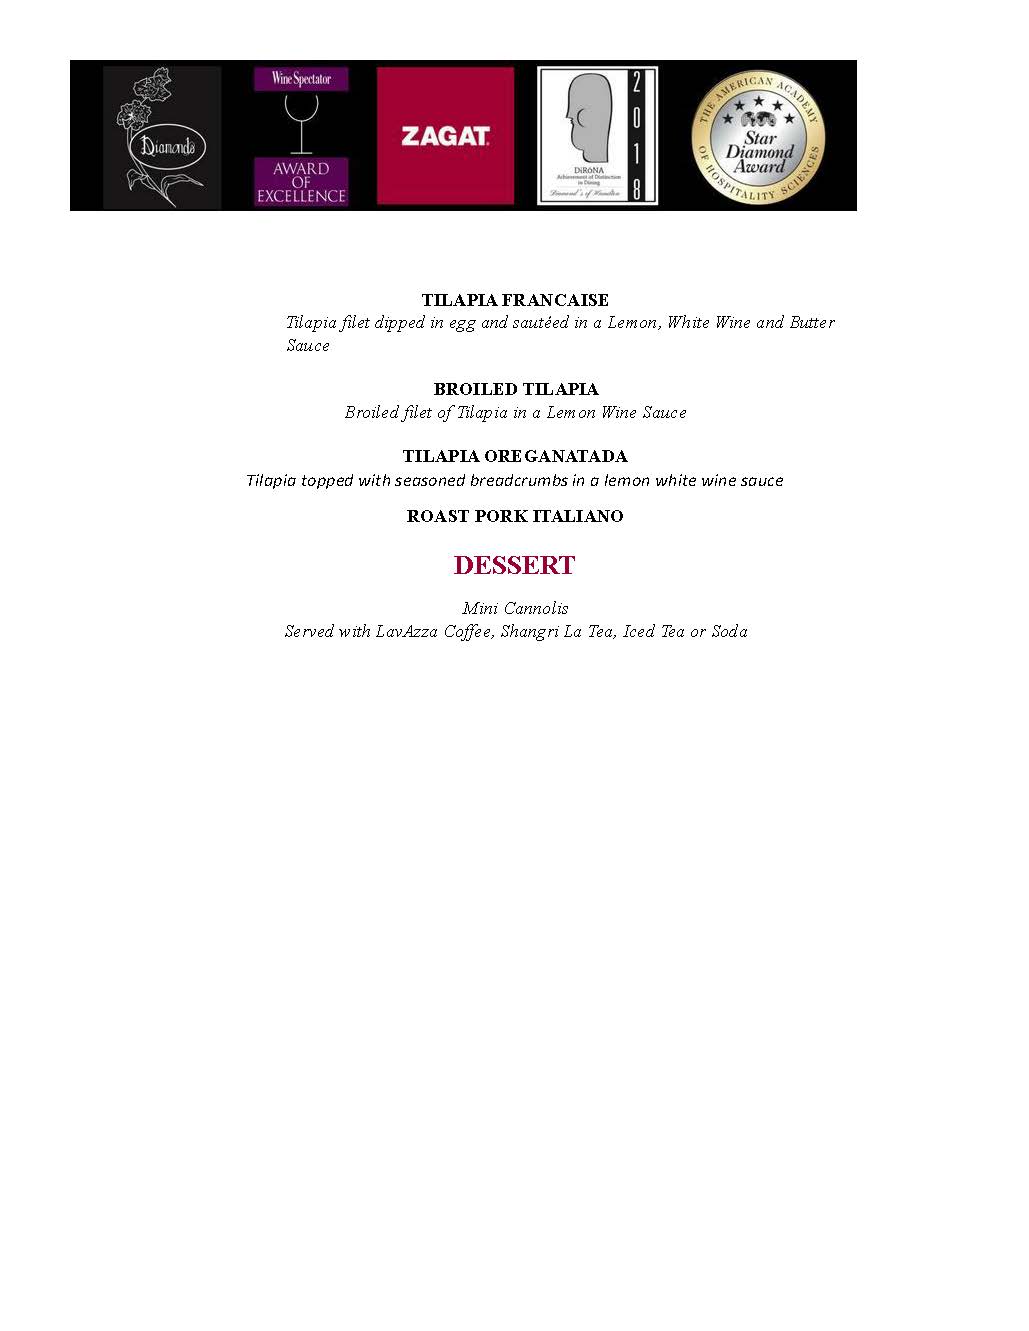 Menu page featuring dessert options with a tilapia main course description, accompanied by several food quality certification logos at the top.